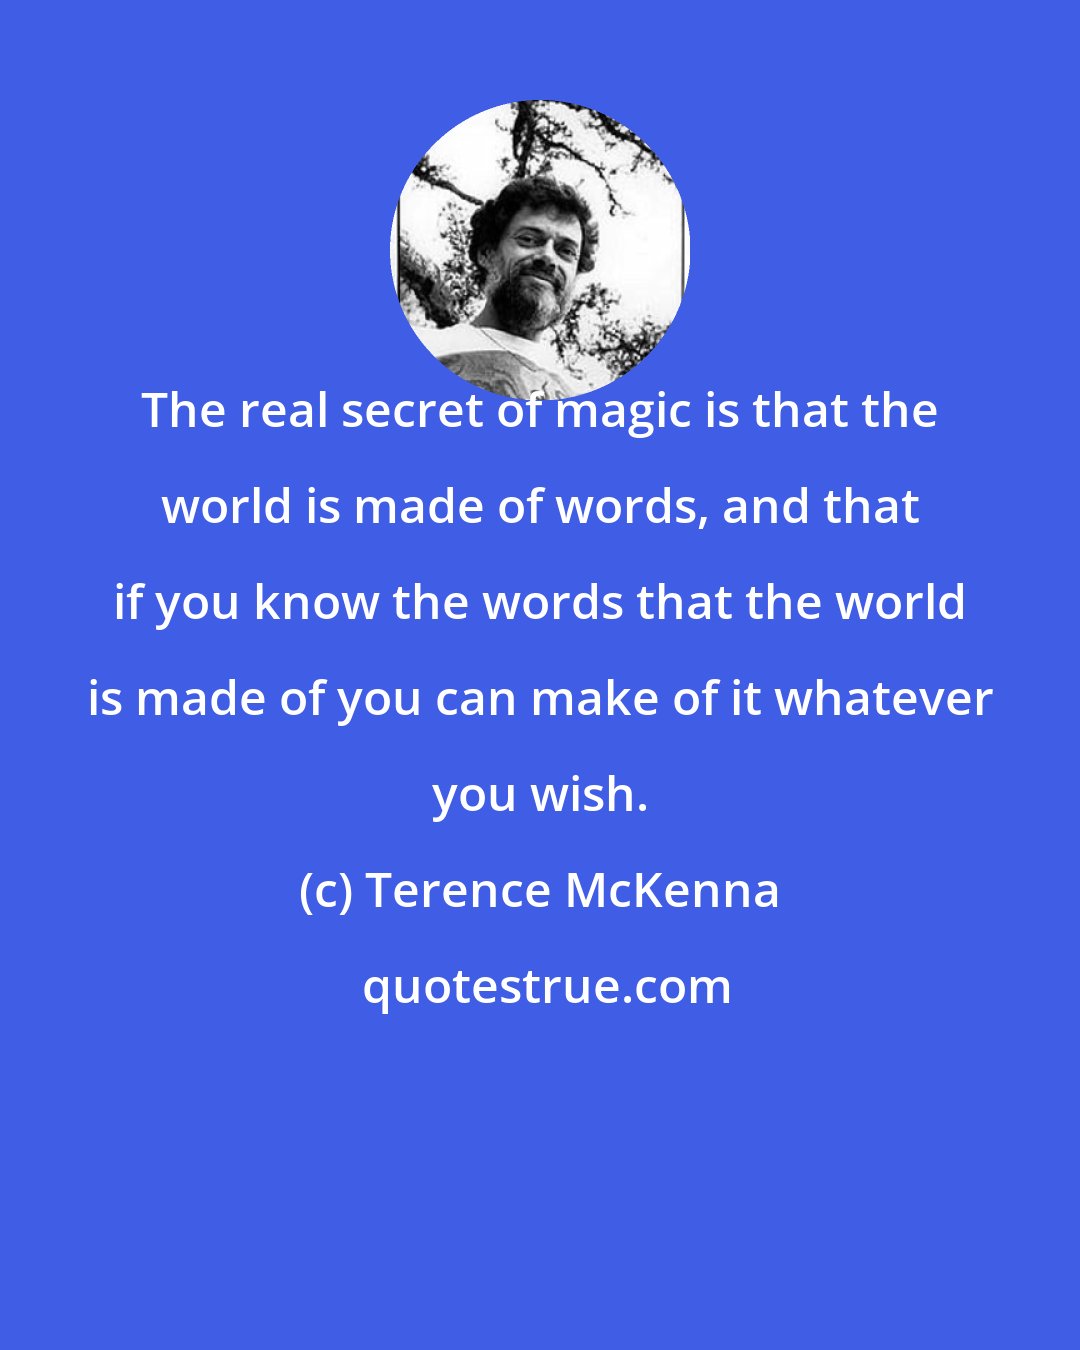 Terence McKenna: The real secret of magic is that the world is made of words, and that if you know the words that the world is made of you can make of it whatever you wish.